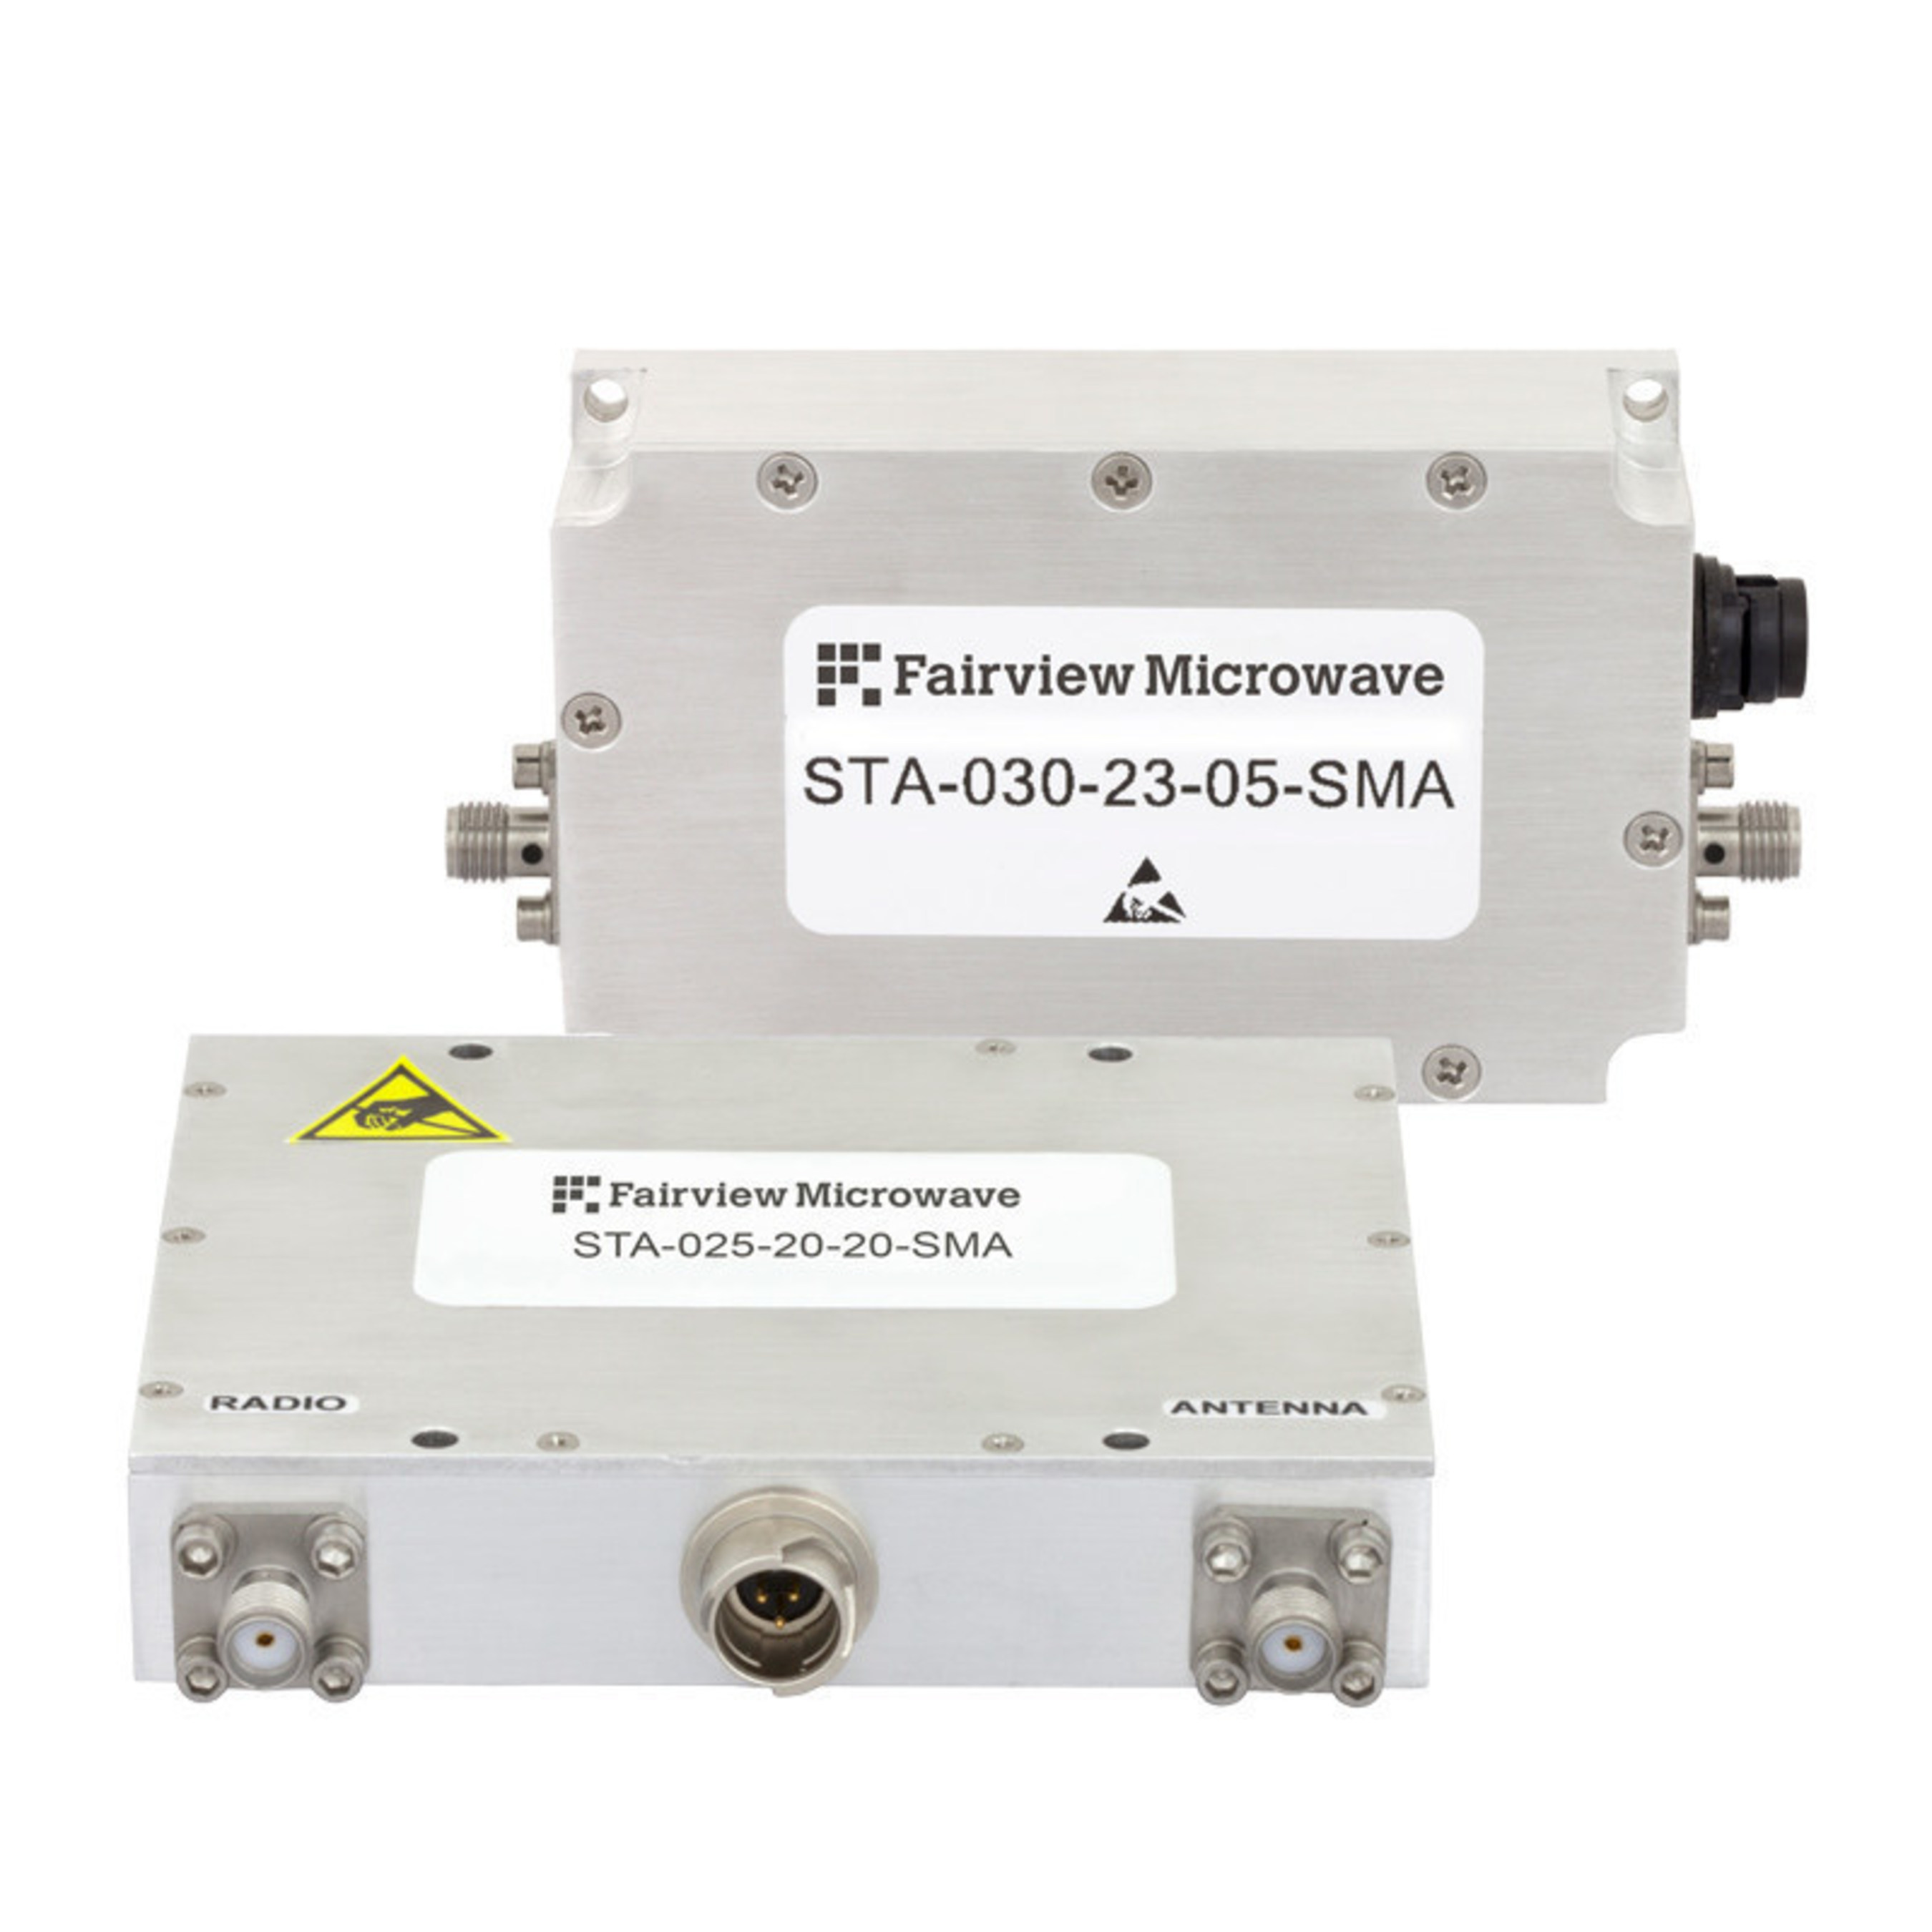 Fairview Microwave Releases Family of Coaxial Packaged Bi-Directional Amplifiers